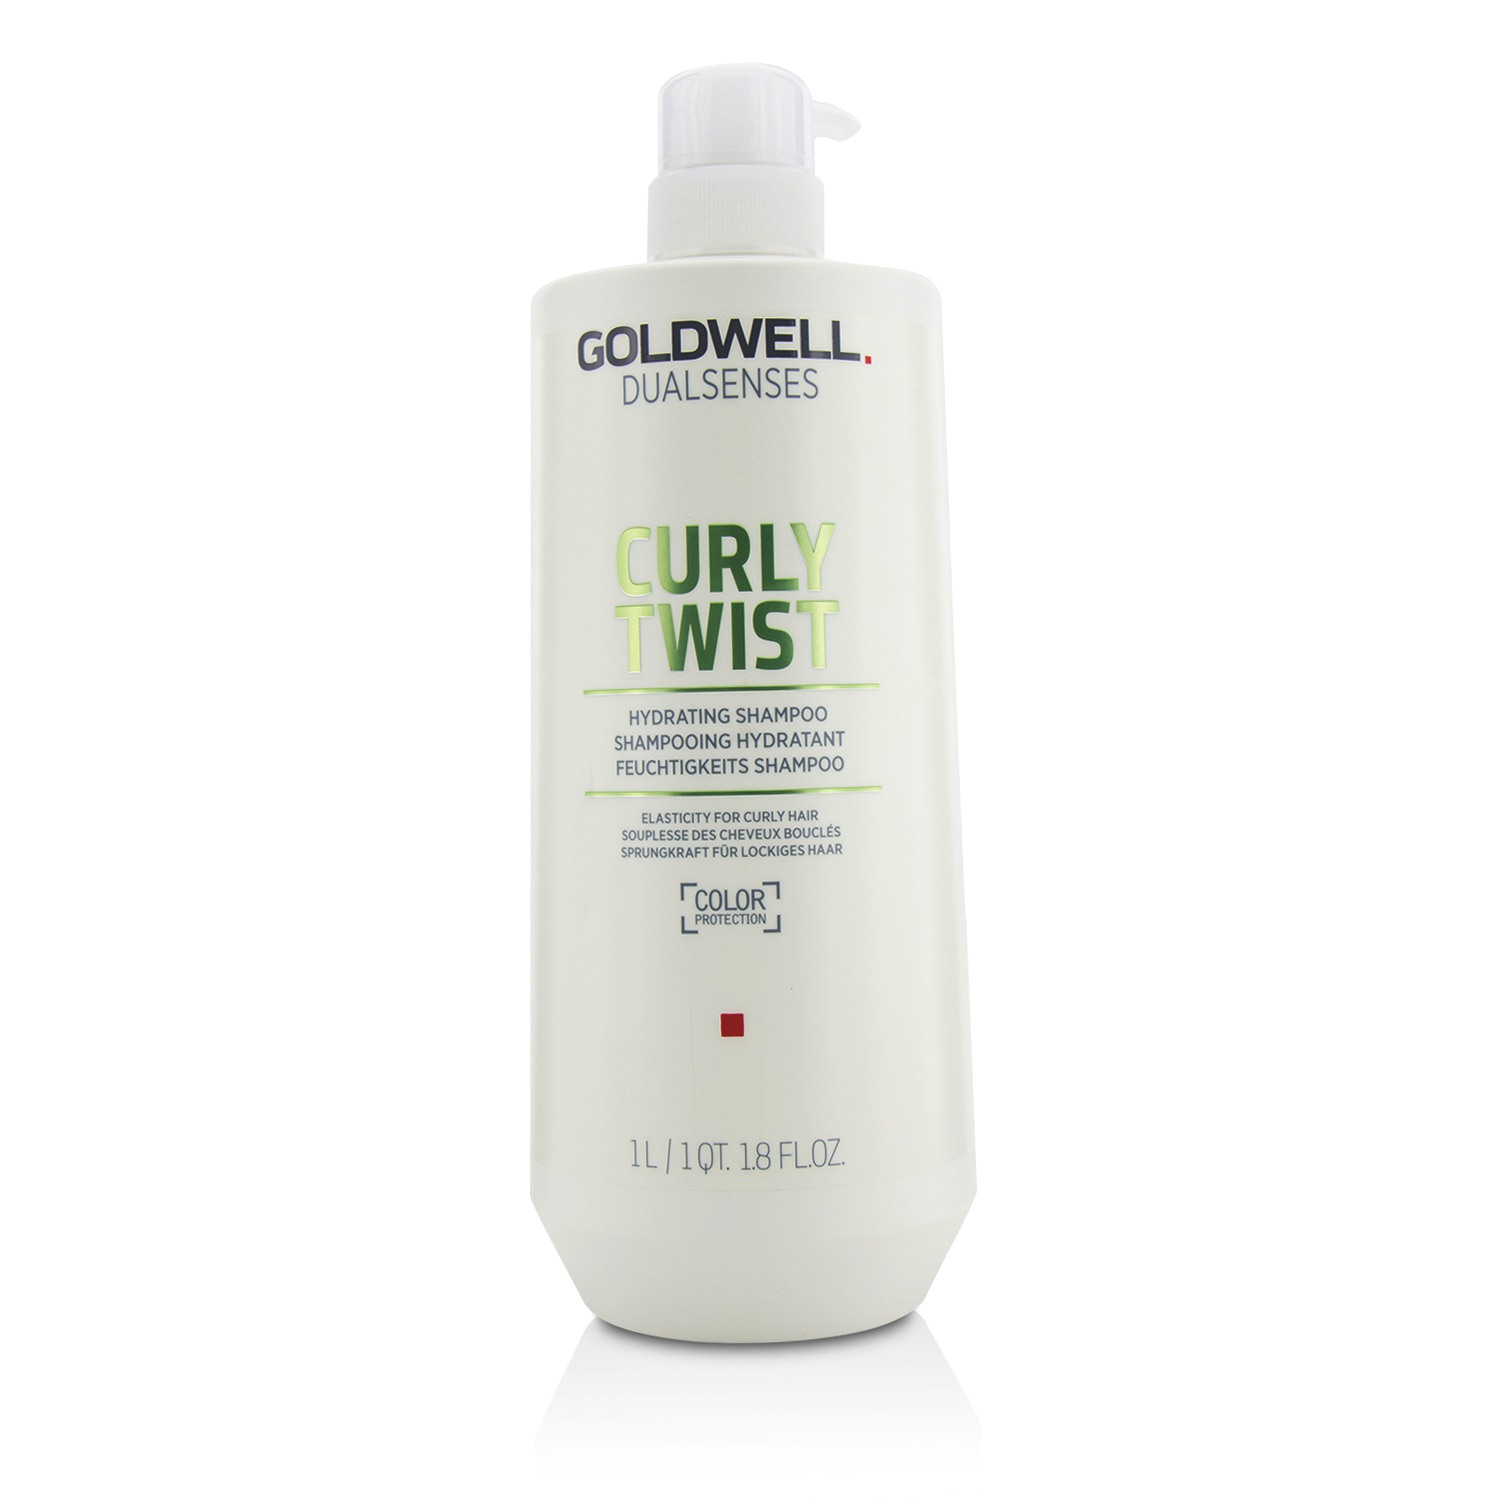 Dual Senses Curly Twist Hydrating Shampoo (Elasticity For Curly Hair) Goldwell Image